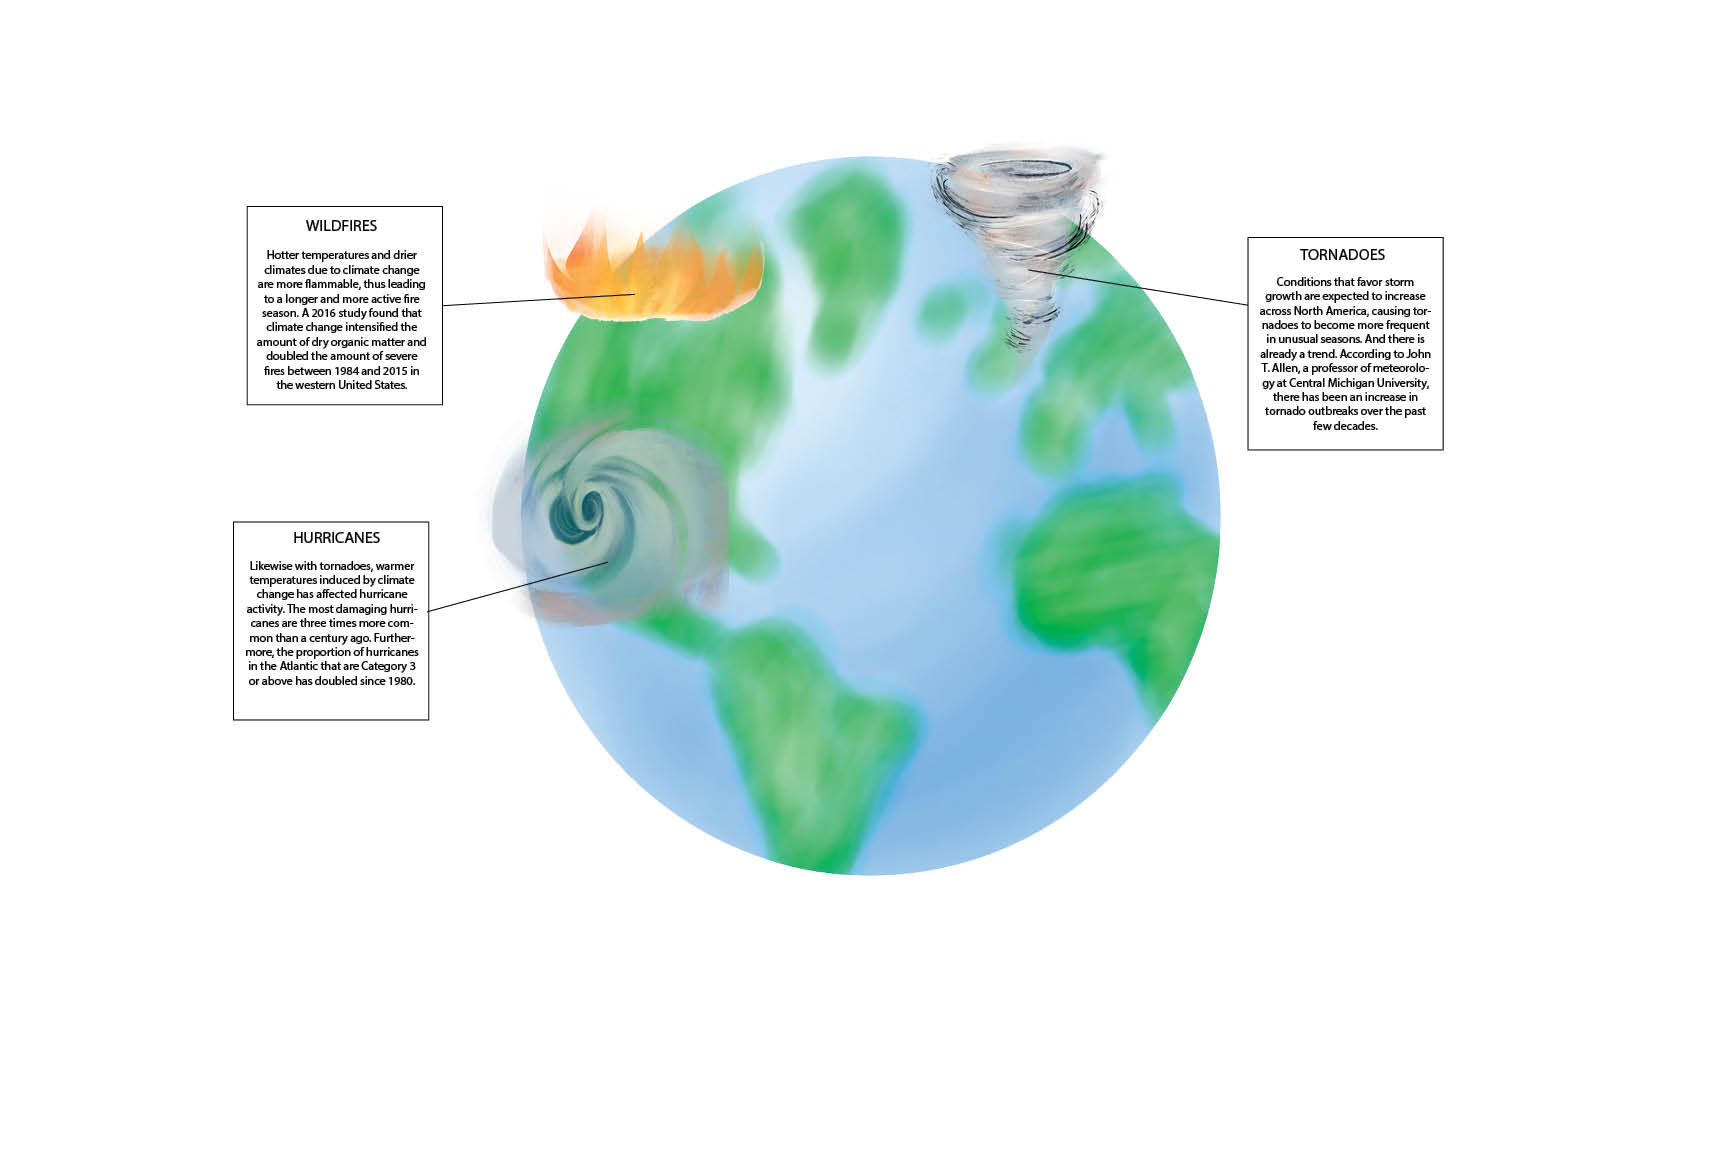 CLIMATE EMERGENCIES. As the years go by, the Earth is affected by climate change, and the natural disasters that have been rising in recent years is proof. From daily weather to extreme climate phenomena, the people inhabiting this planet have had considerable impact on Earth. (Illustration by Annika Kim, Infographic by Johanna Pierach, Orion Kim)